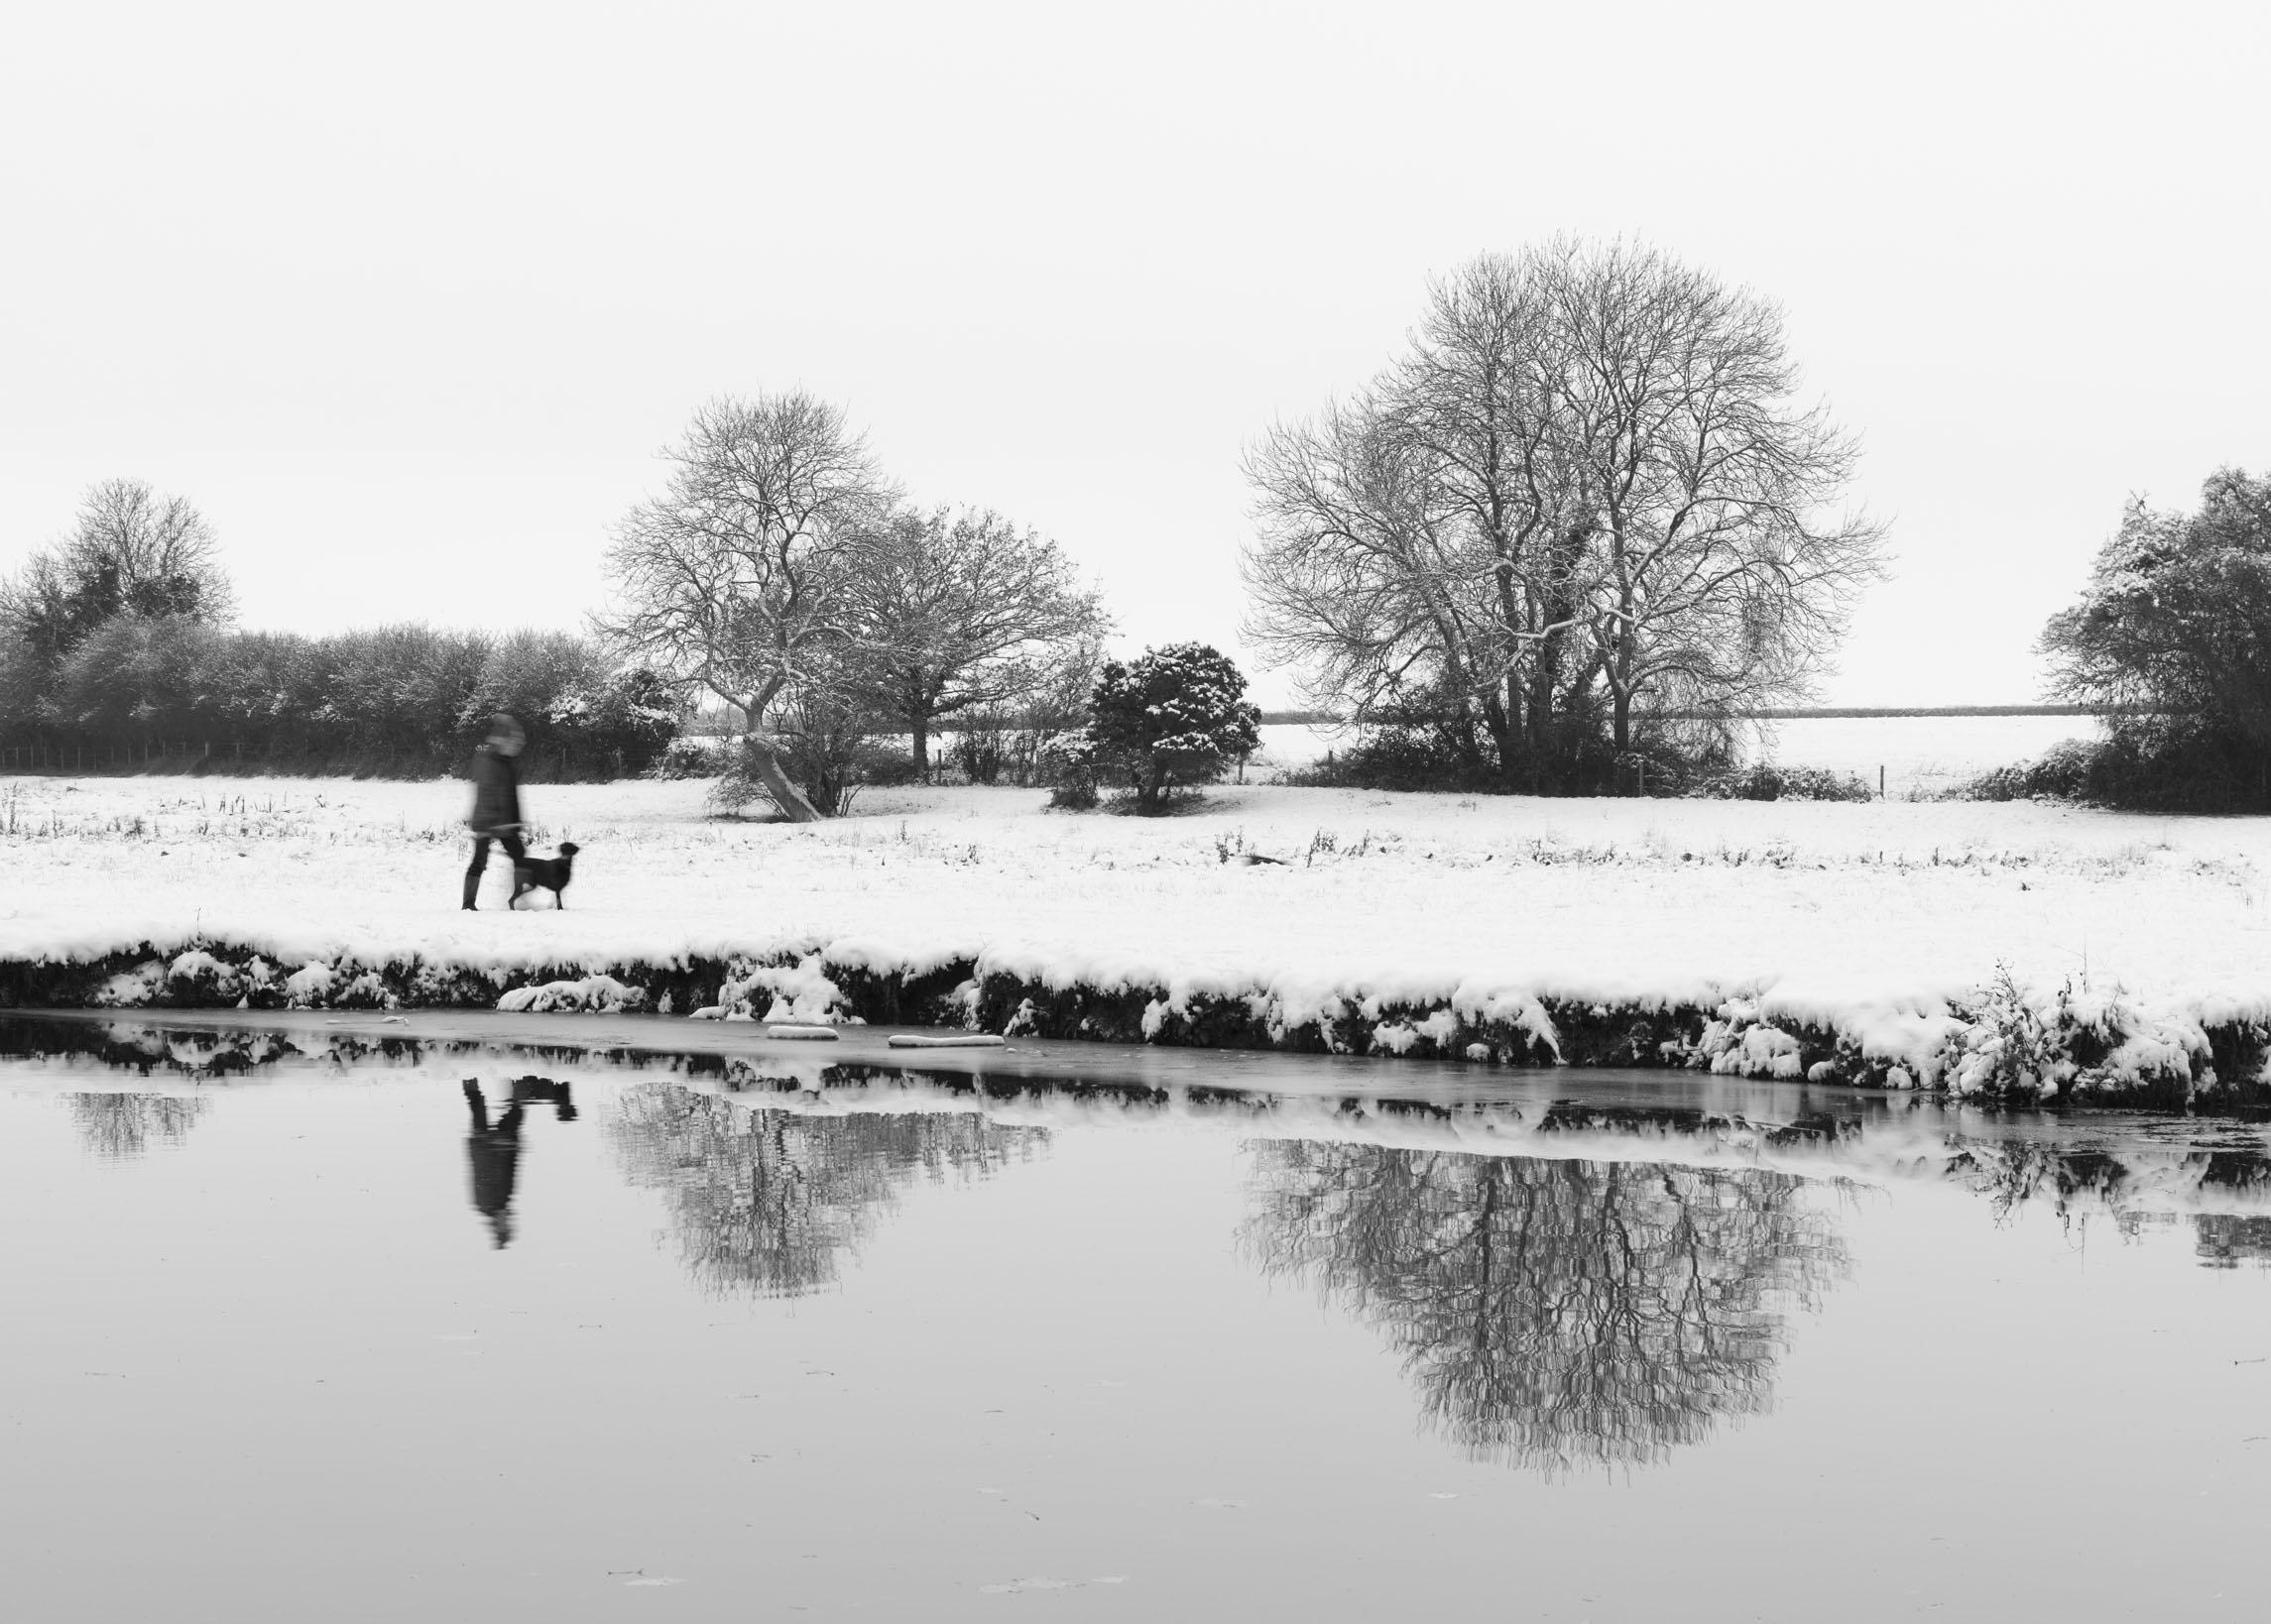 I spent some time here in December 2022 trying to get a photo of walkers in the snow, with the two trees. This one worked nicest in terms of position of the walker, and the dull sky meant there wasn't much colour so I thought black and white would be best.